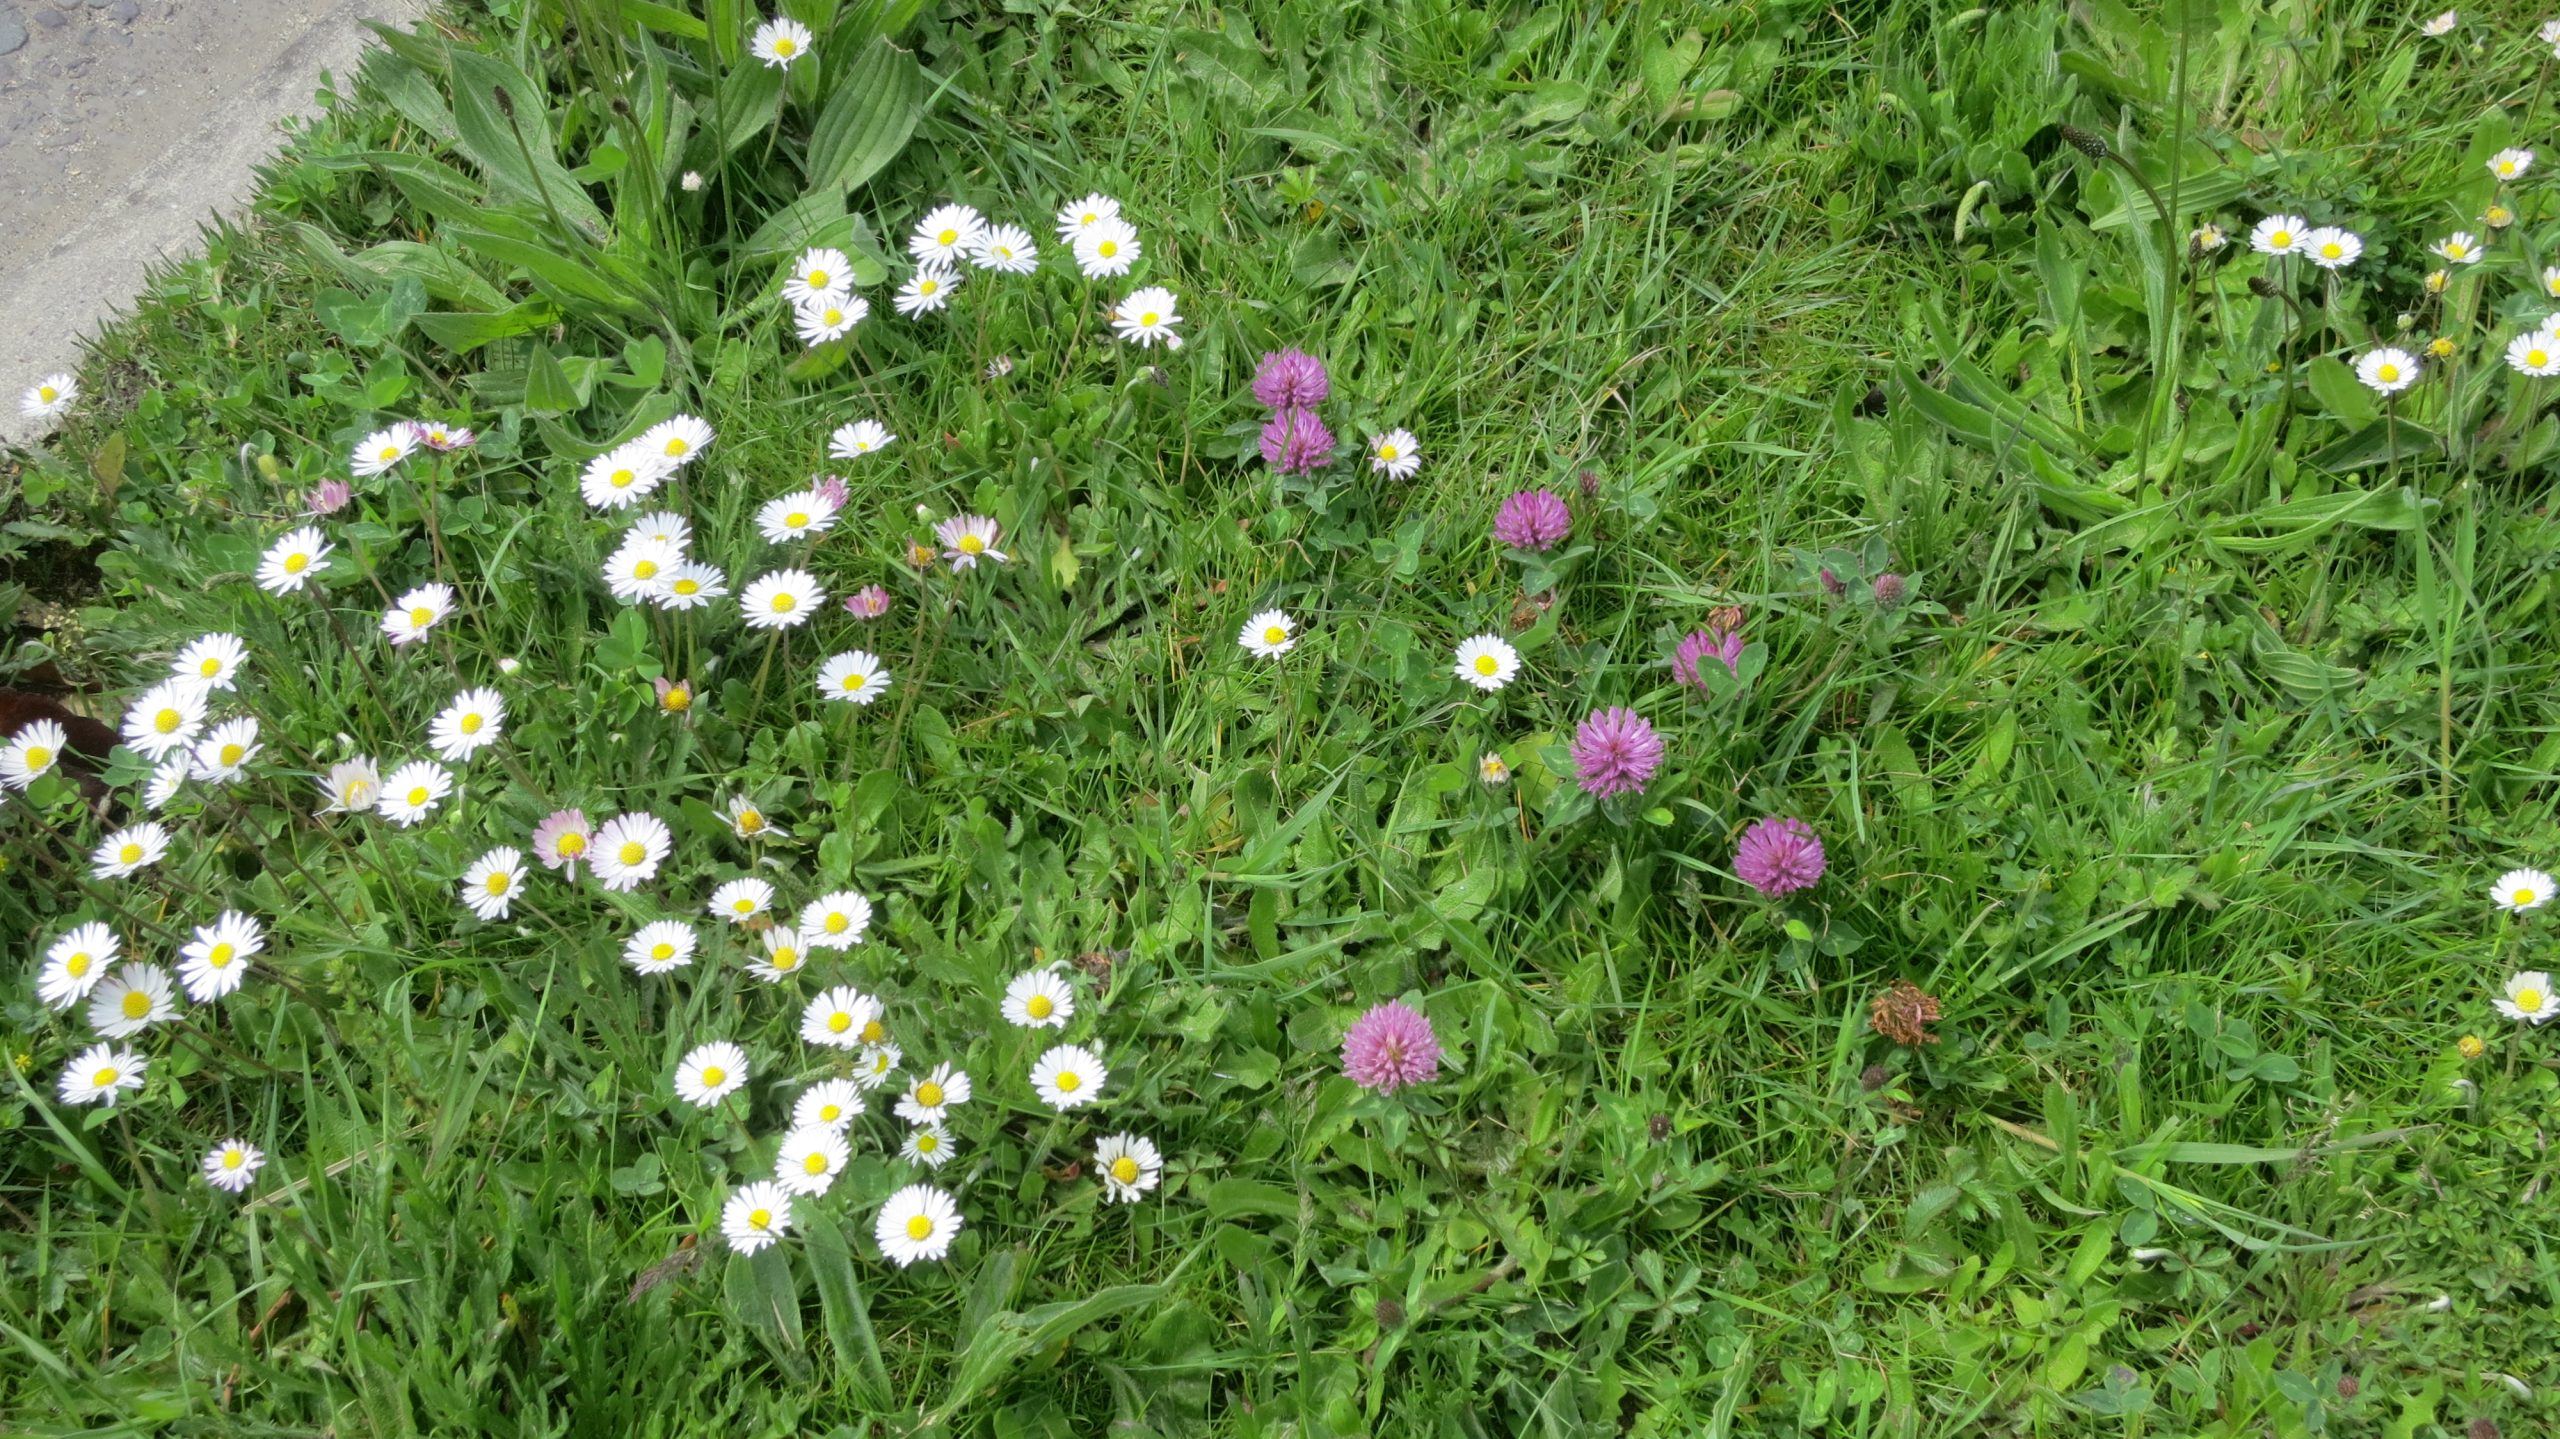 Daisies and clover